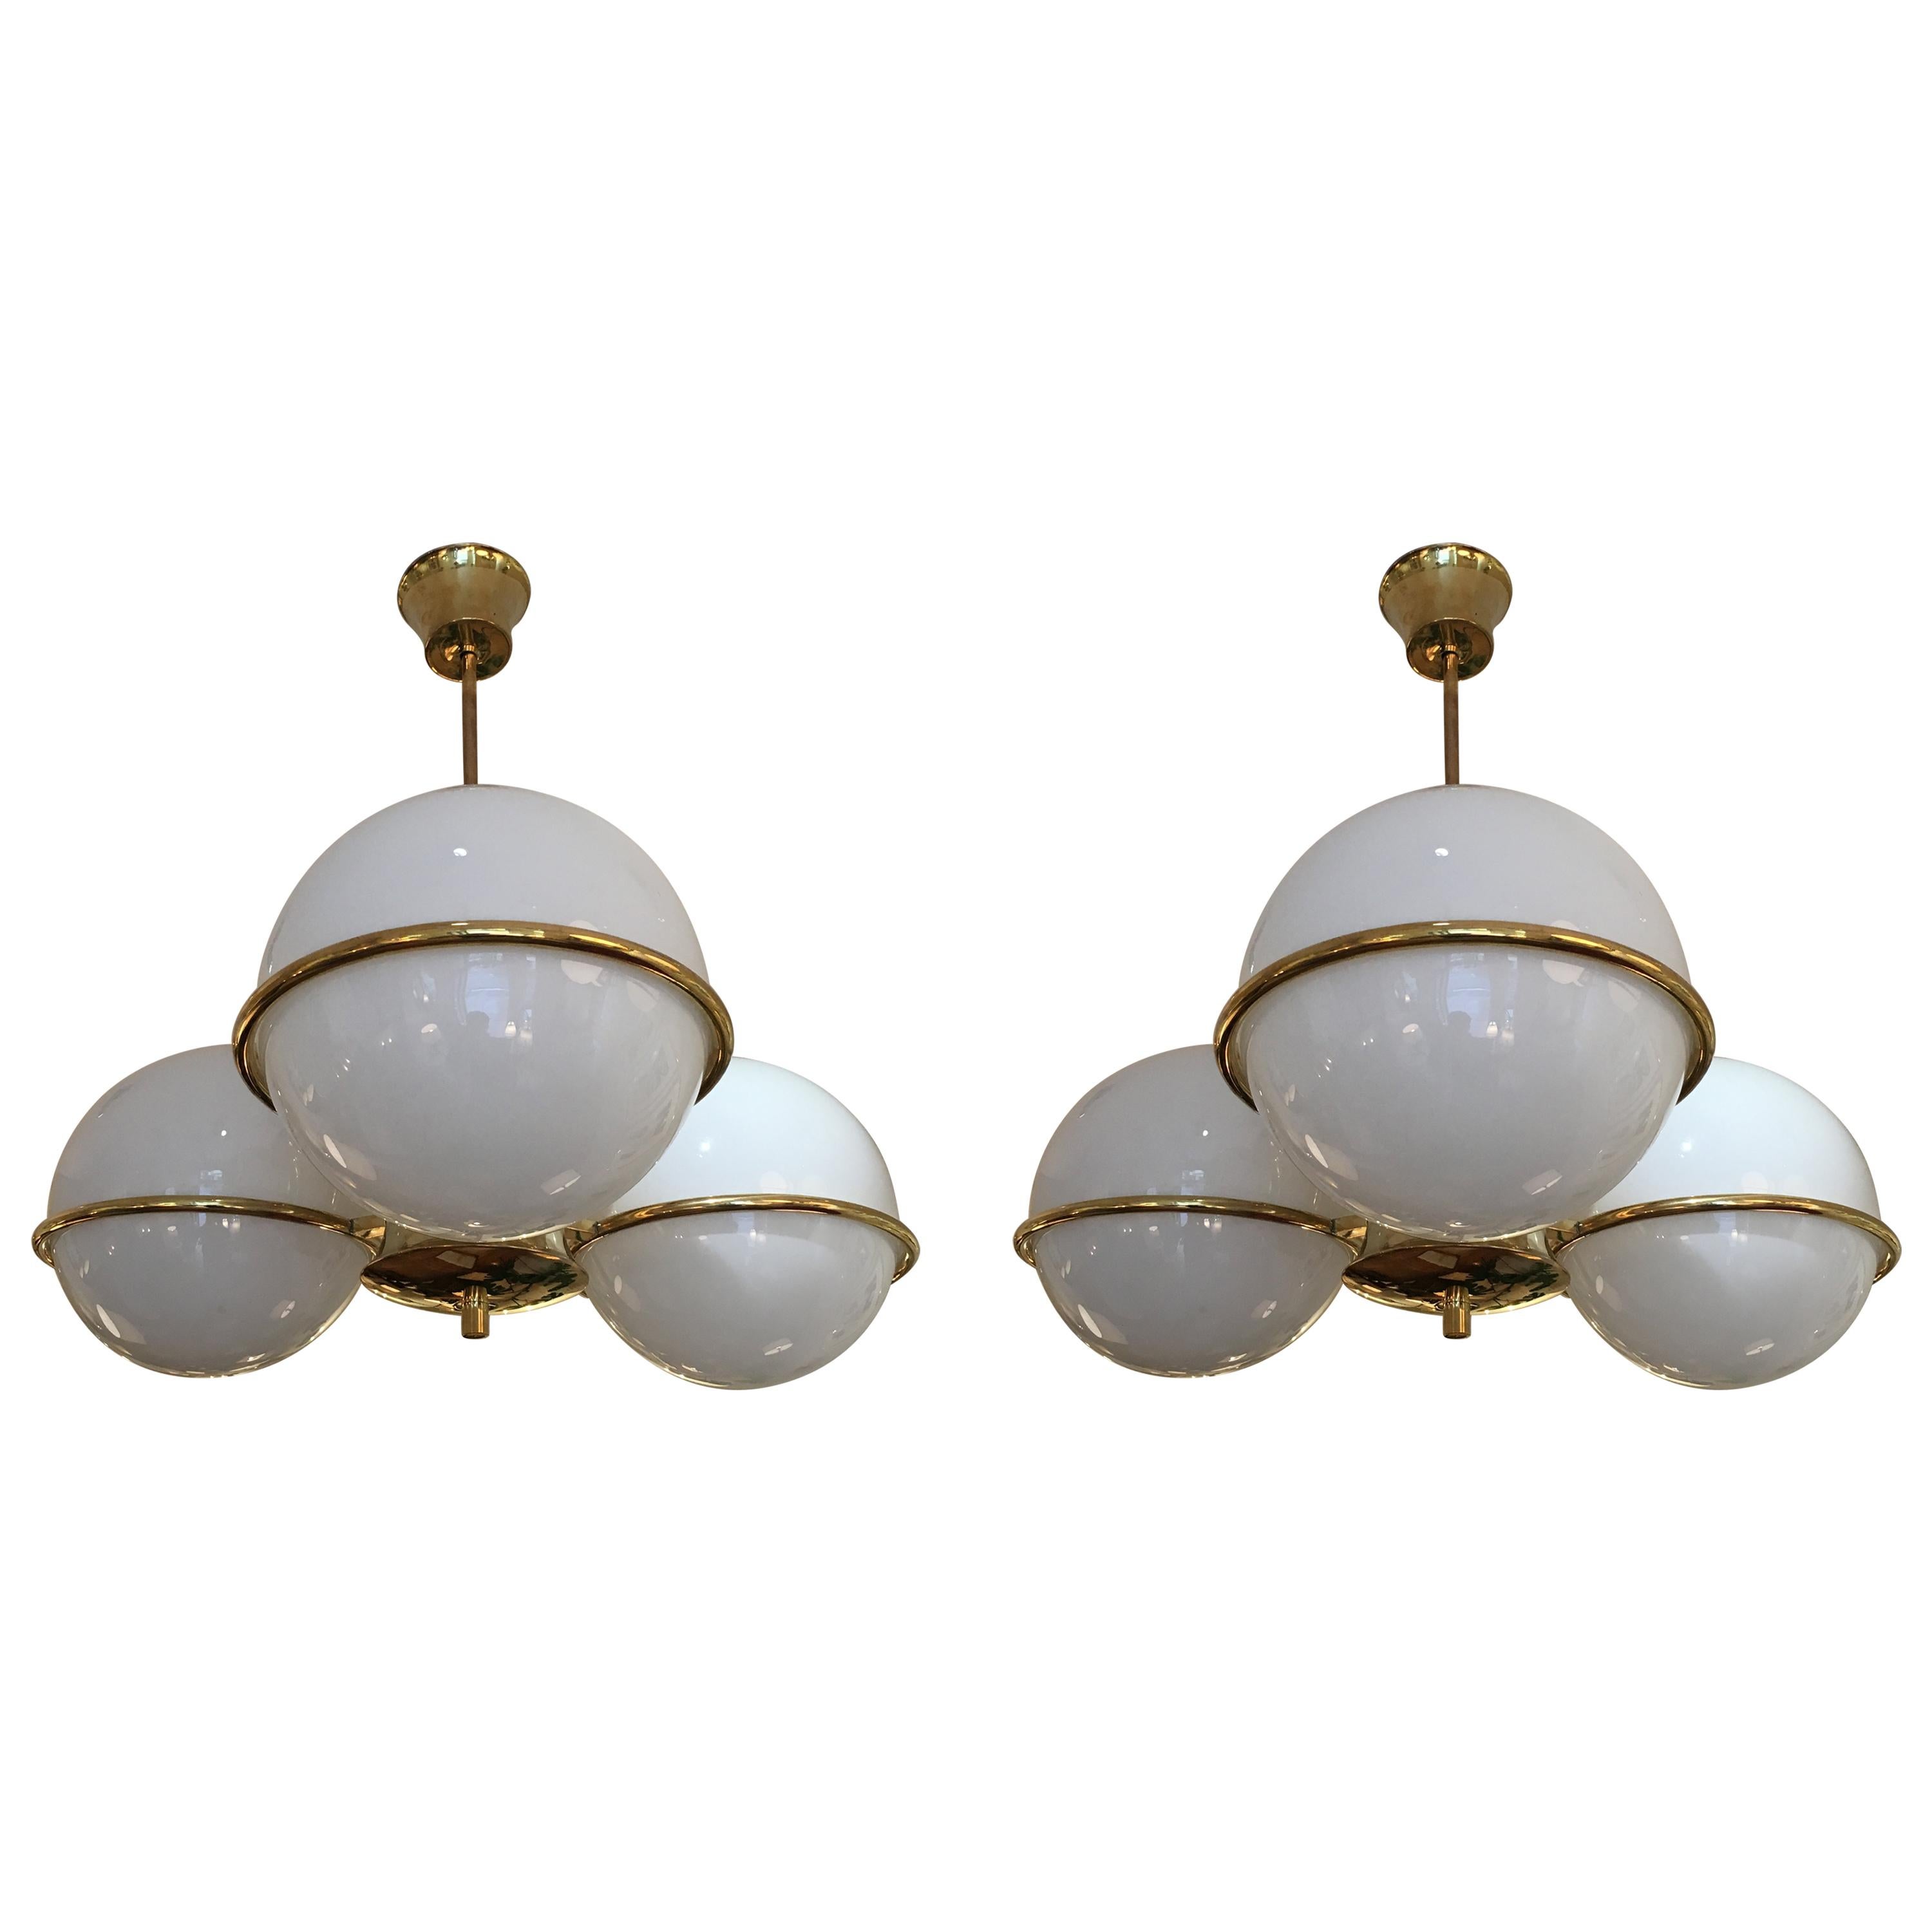 A pair of brass and opaline glass globes three-light chandeliers
Sweden, second half of the 20th century.